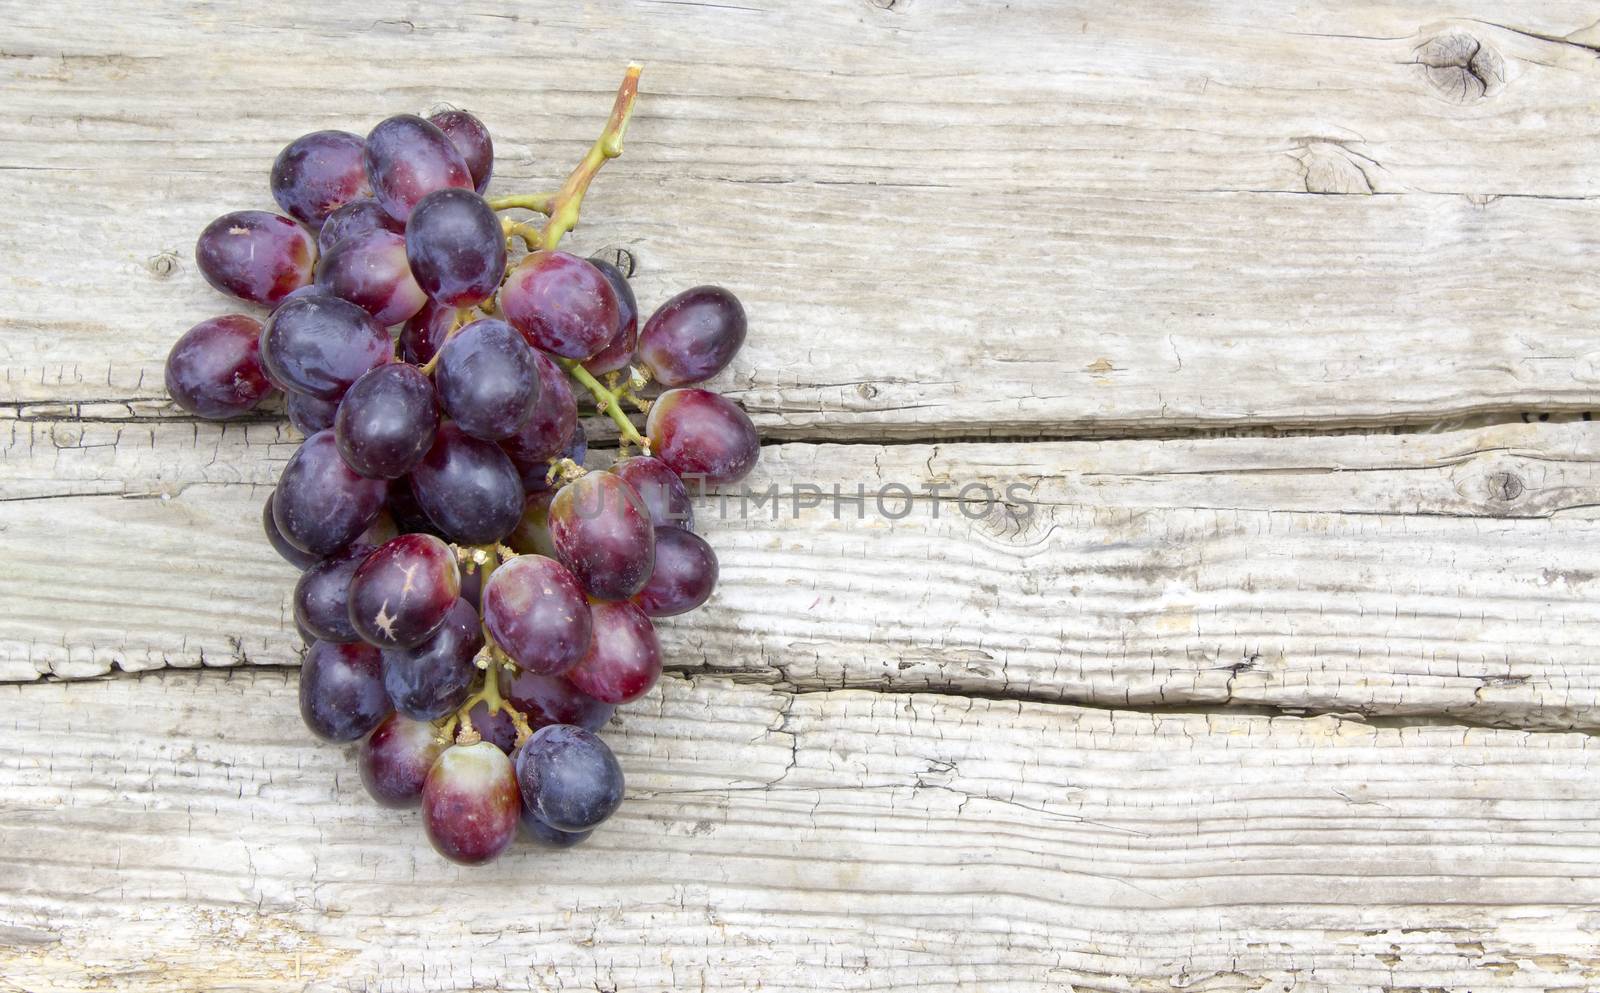 grapes on old wooden background by miradrozdowski